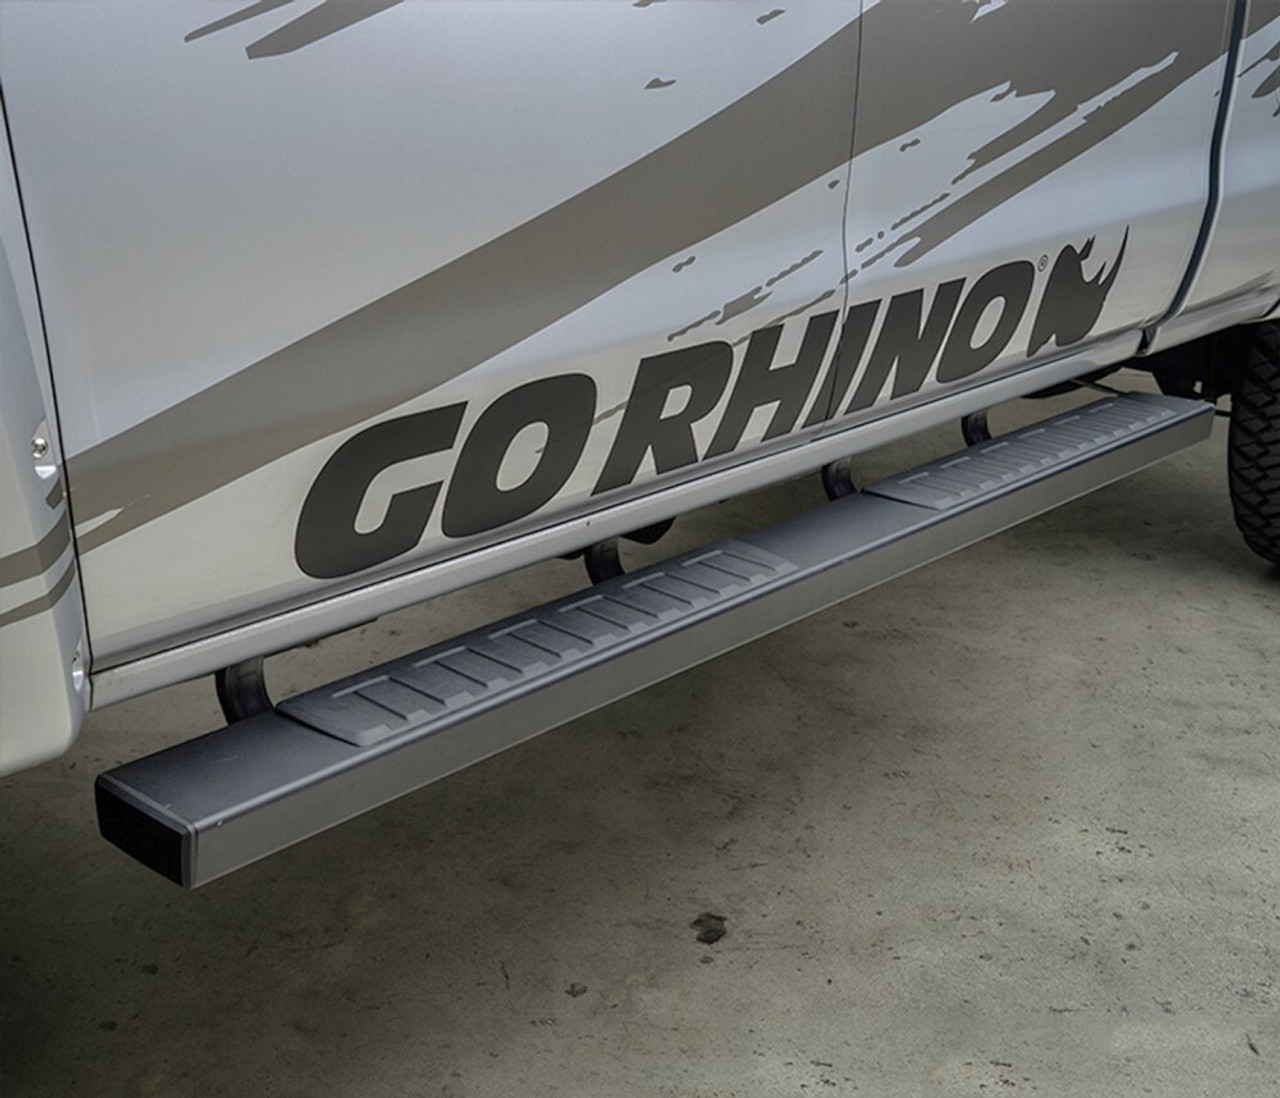 Go Rhino 6862415552PS Ford, F-150, 2015 - 2021, 6 inch OE Xtreme II- Complete Kit: SideSteps + Brackets, Stainless steel, Polished, 660152PS side bars + 6841555 OE Xtreme Brackets. 6 inch wide x 52 inch long side bars.